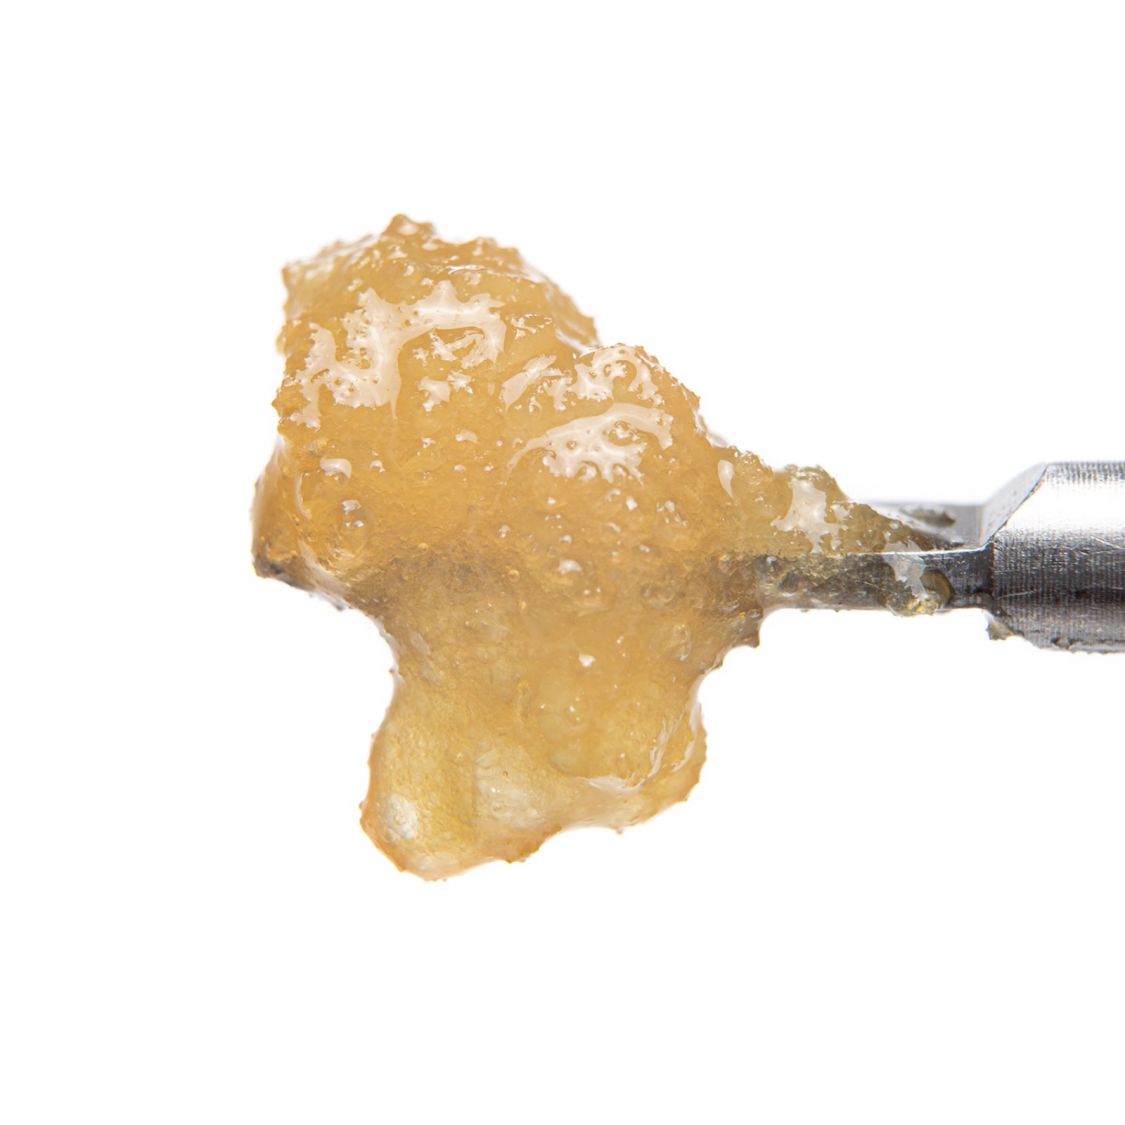 SUPREME GAS Bubba Kush - Live Resin Concentrates Concentrate